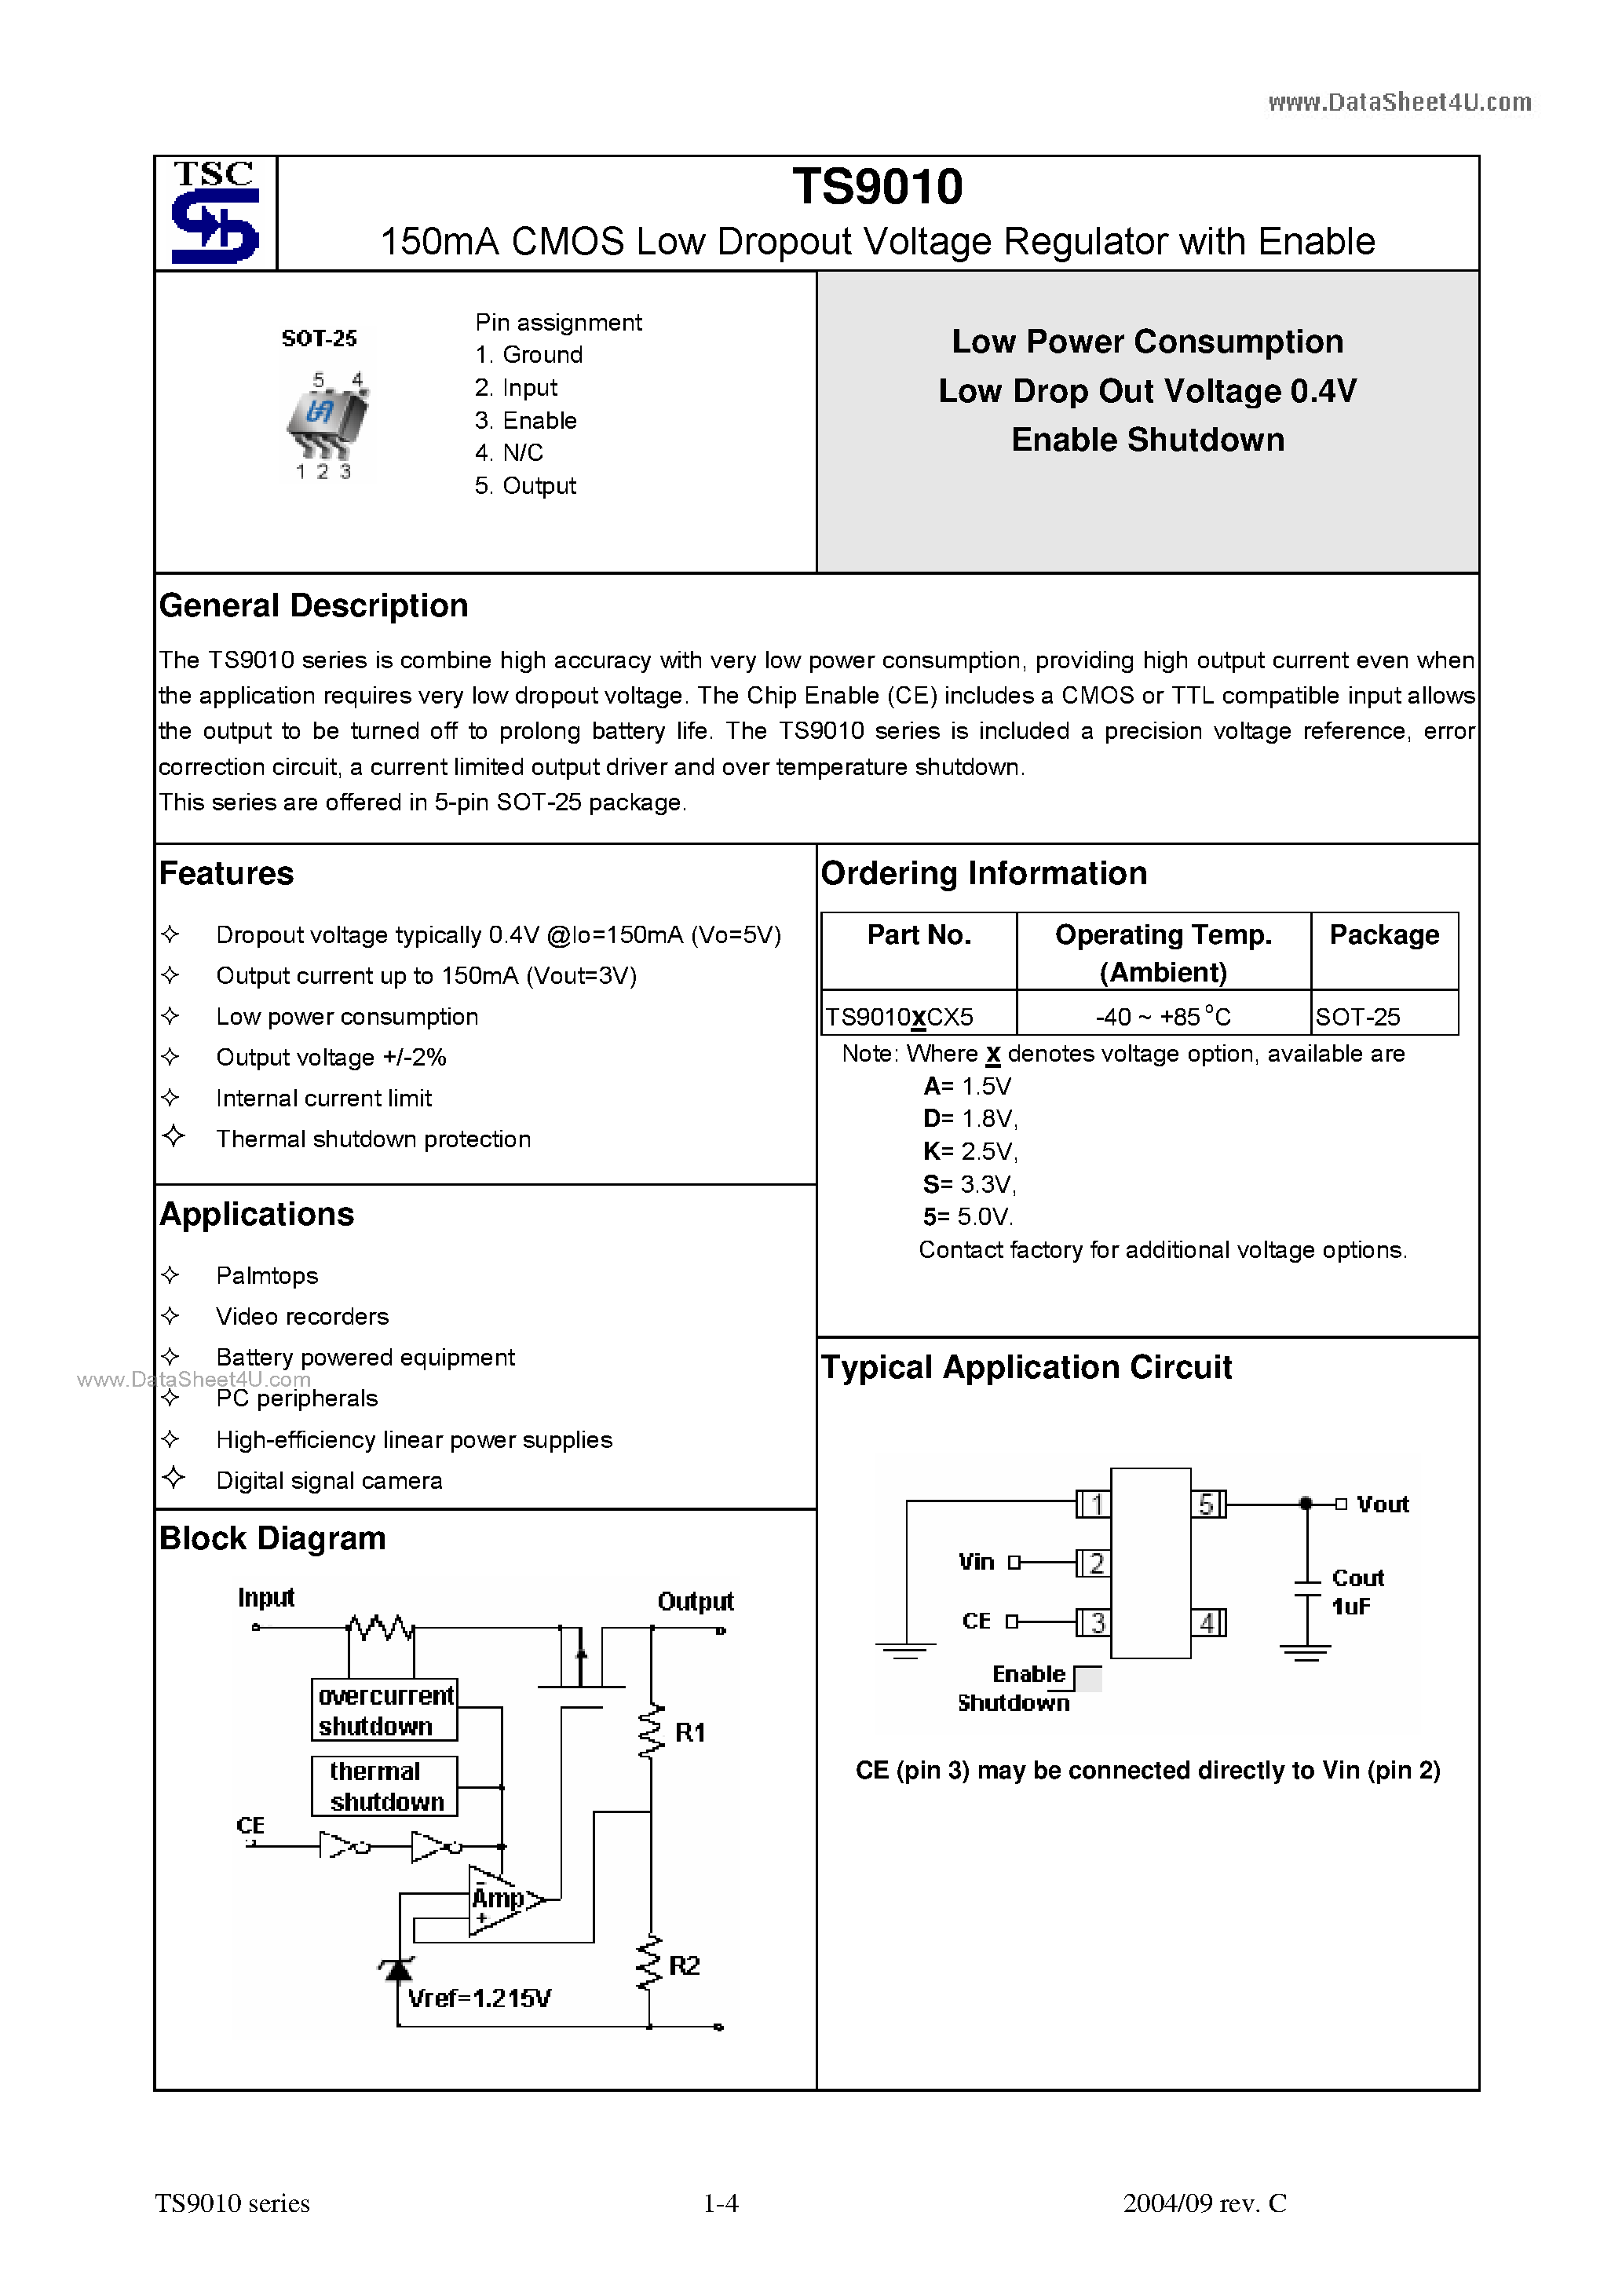 Datasheet TS9010 - 150mA CMOS Low Dropout Voltage Regulator page 1